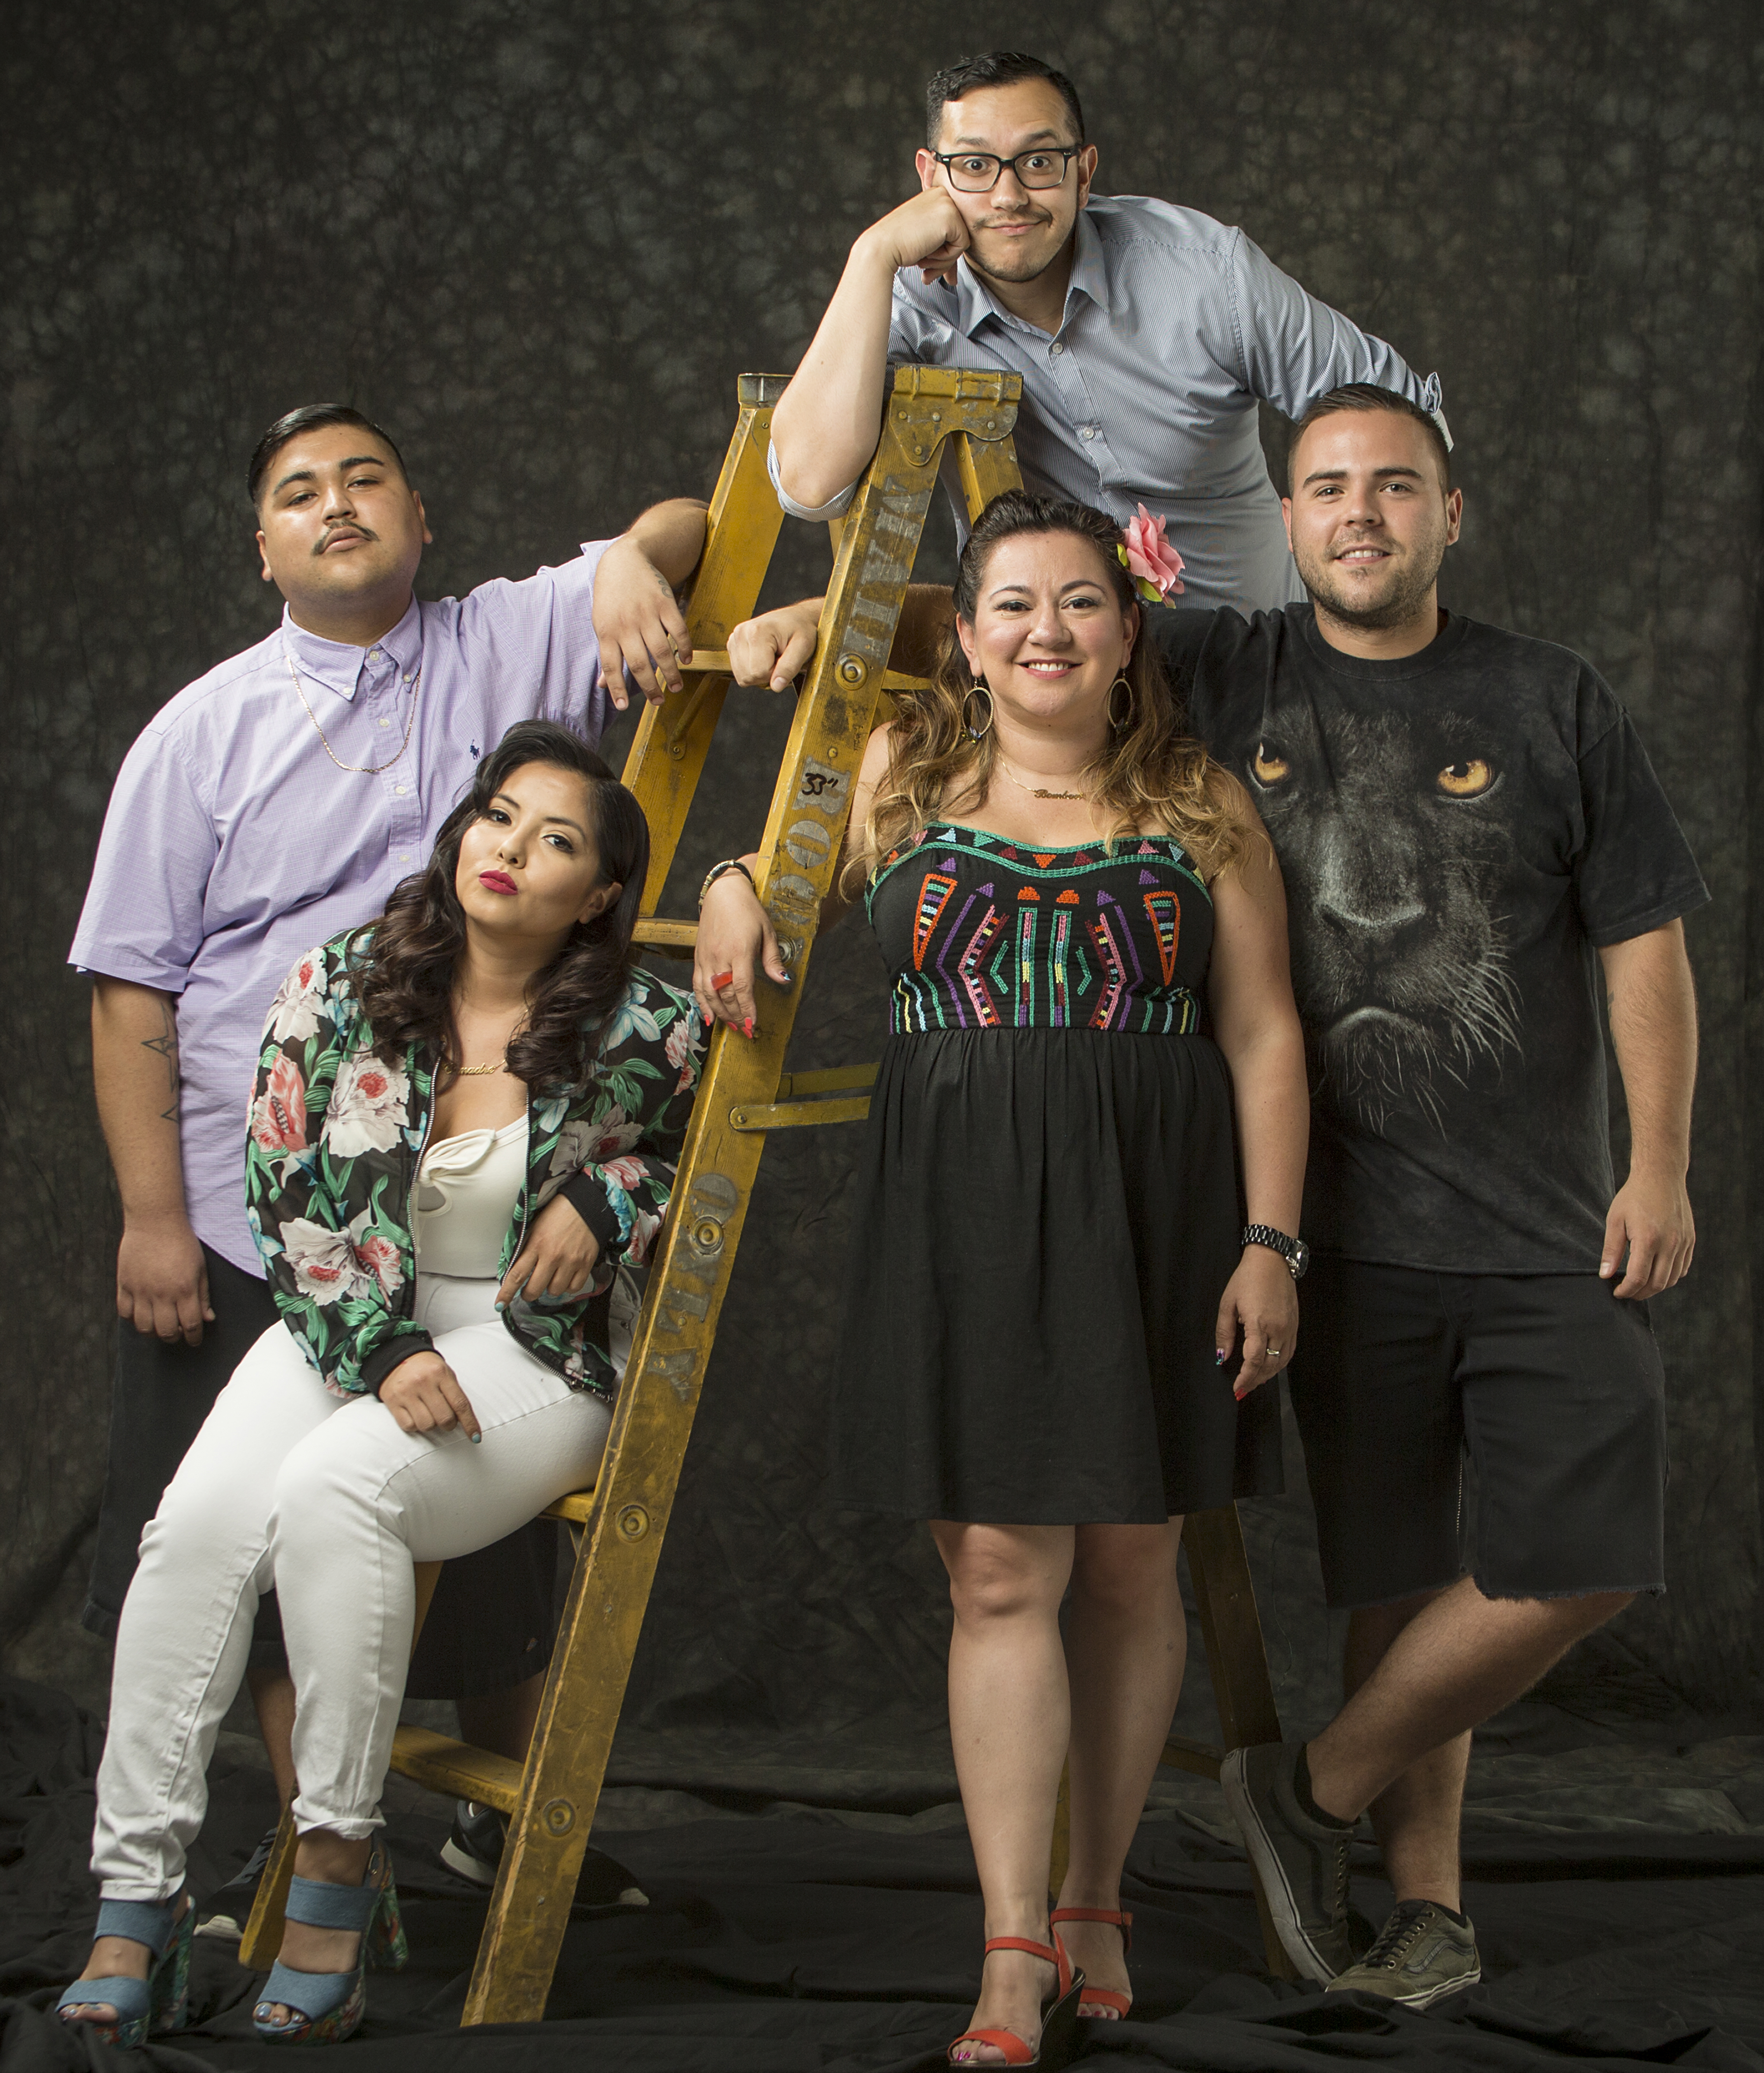 Svani Quintanilla (left) poses for a portrait with fellow DJ group Bombon, including Bobby Hinojosa, Alejandro Nava, Gracie Chavez, and Melissa Gomez, on July 23, 2015, in Houston, Texas. | Source: Getty Images